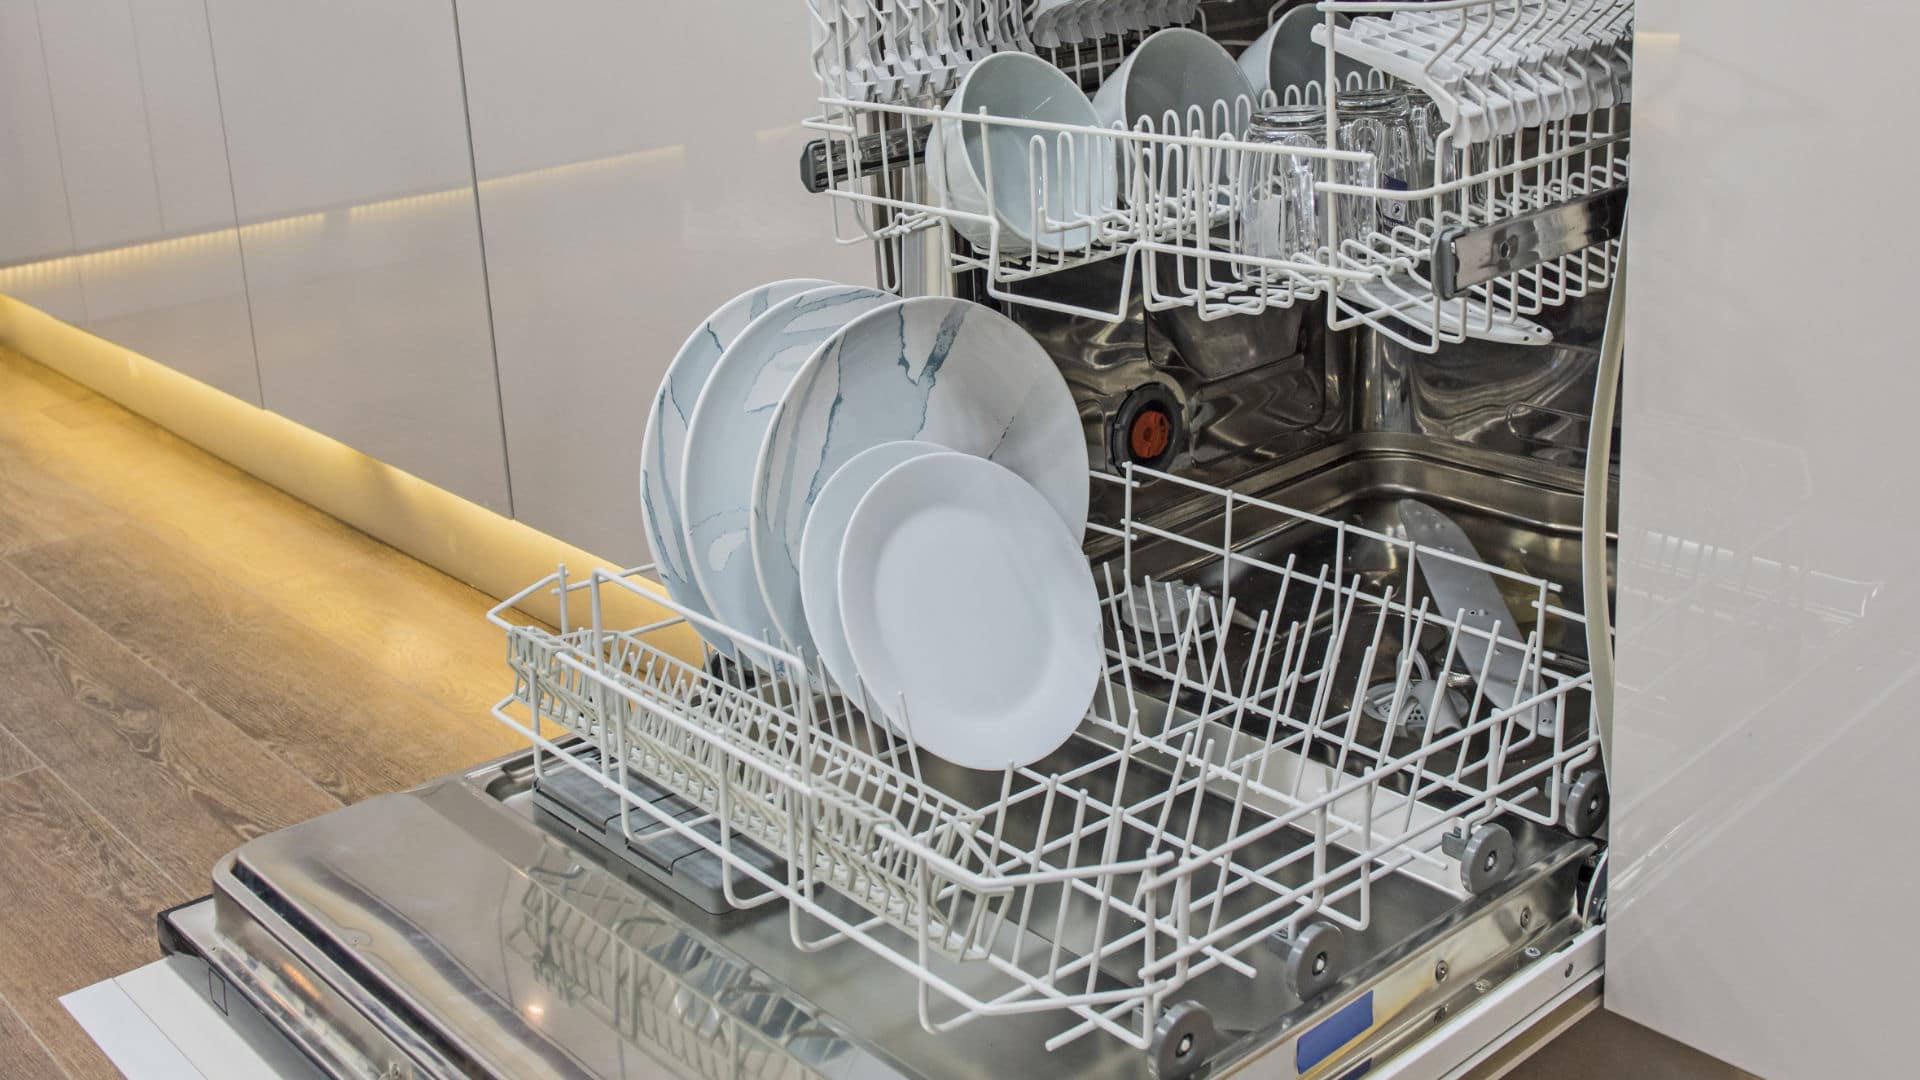 Featured image for “Dishwasher Making Buzzing Noise? Here’s What to Do”